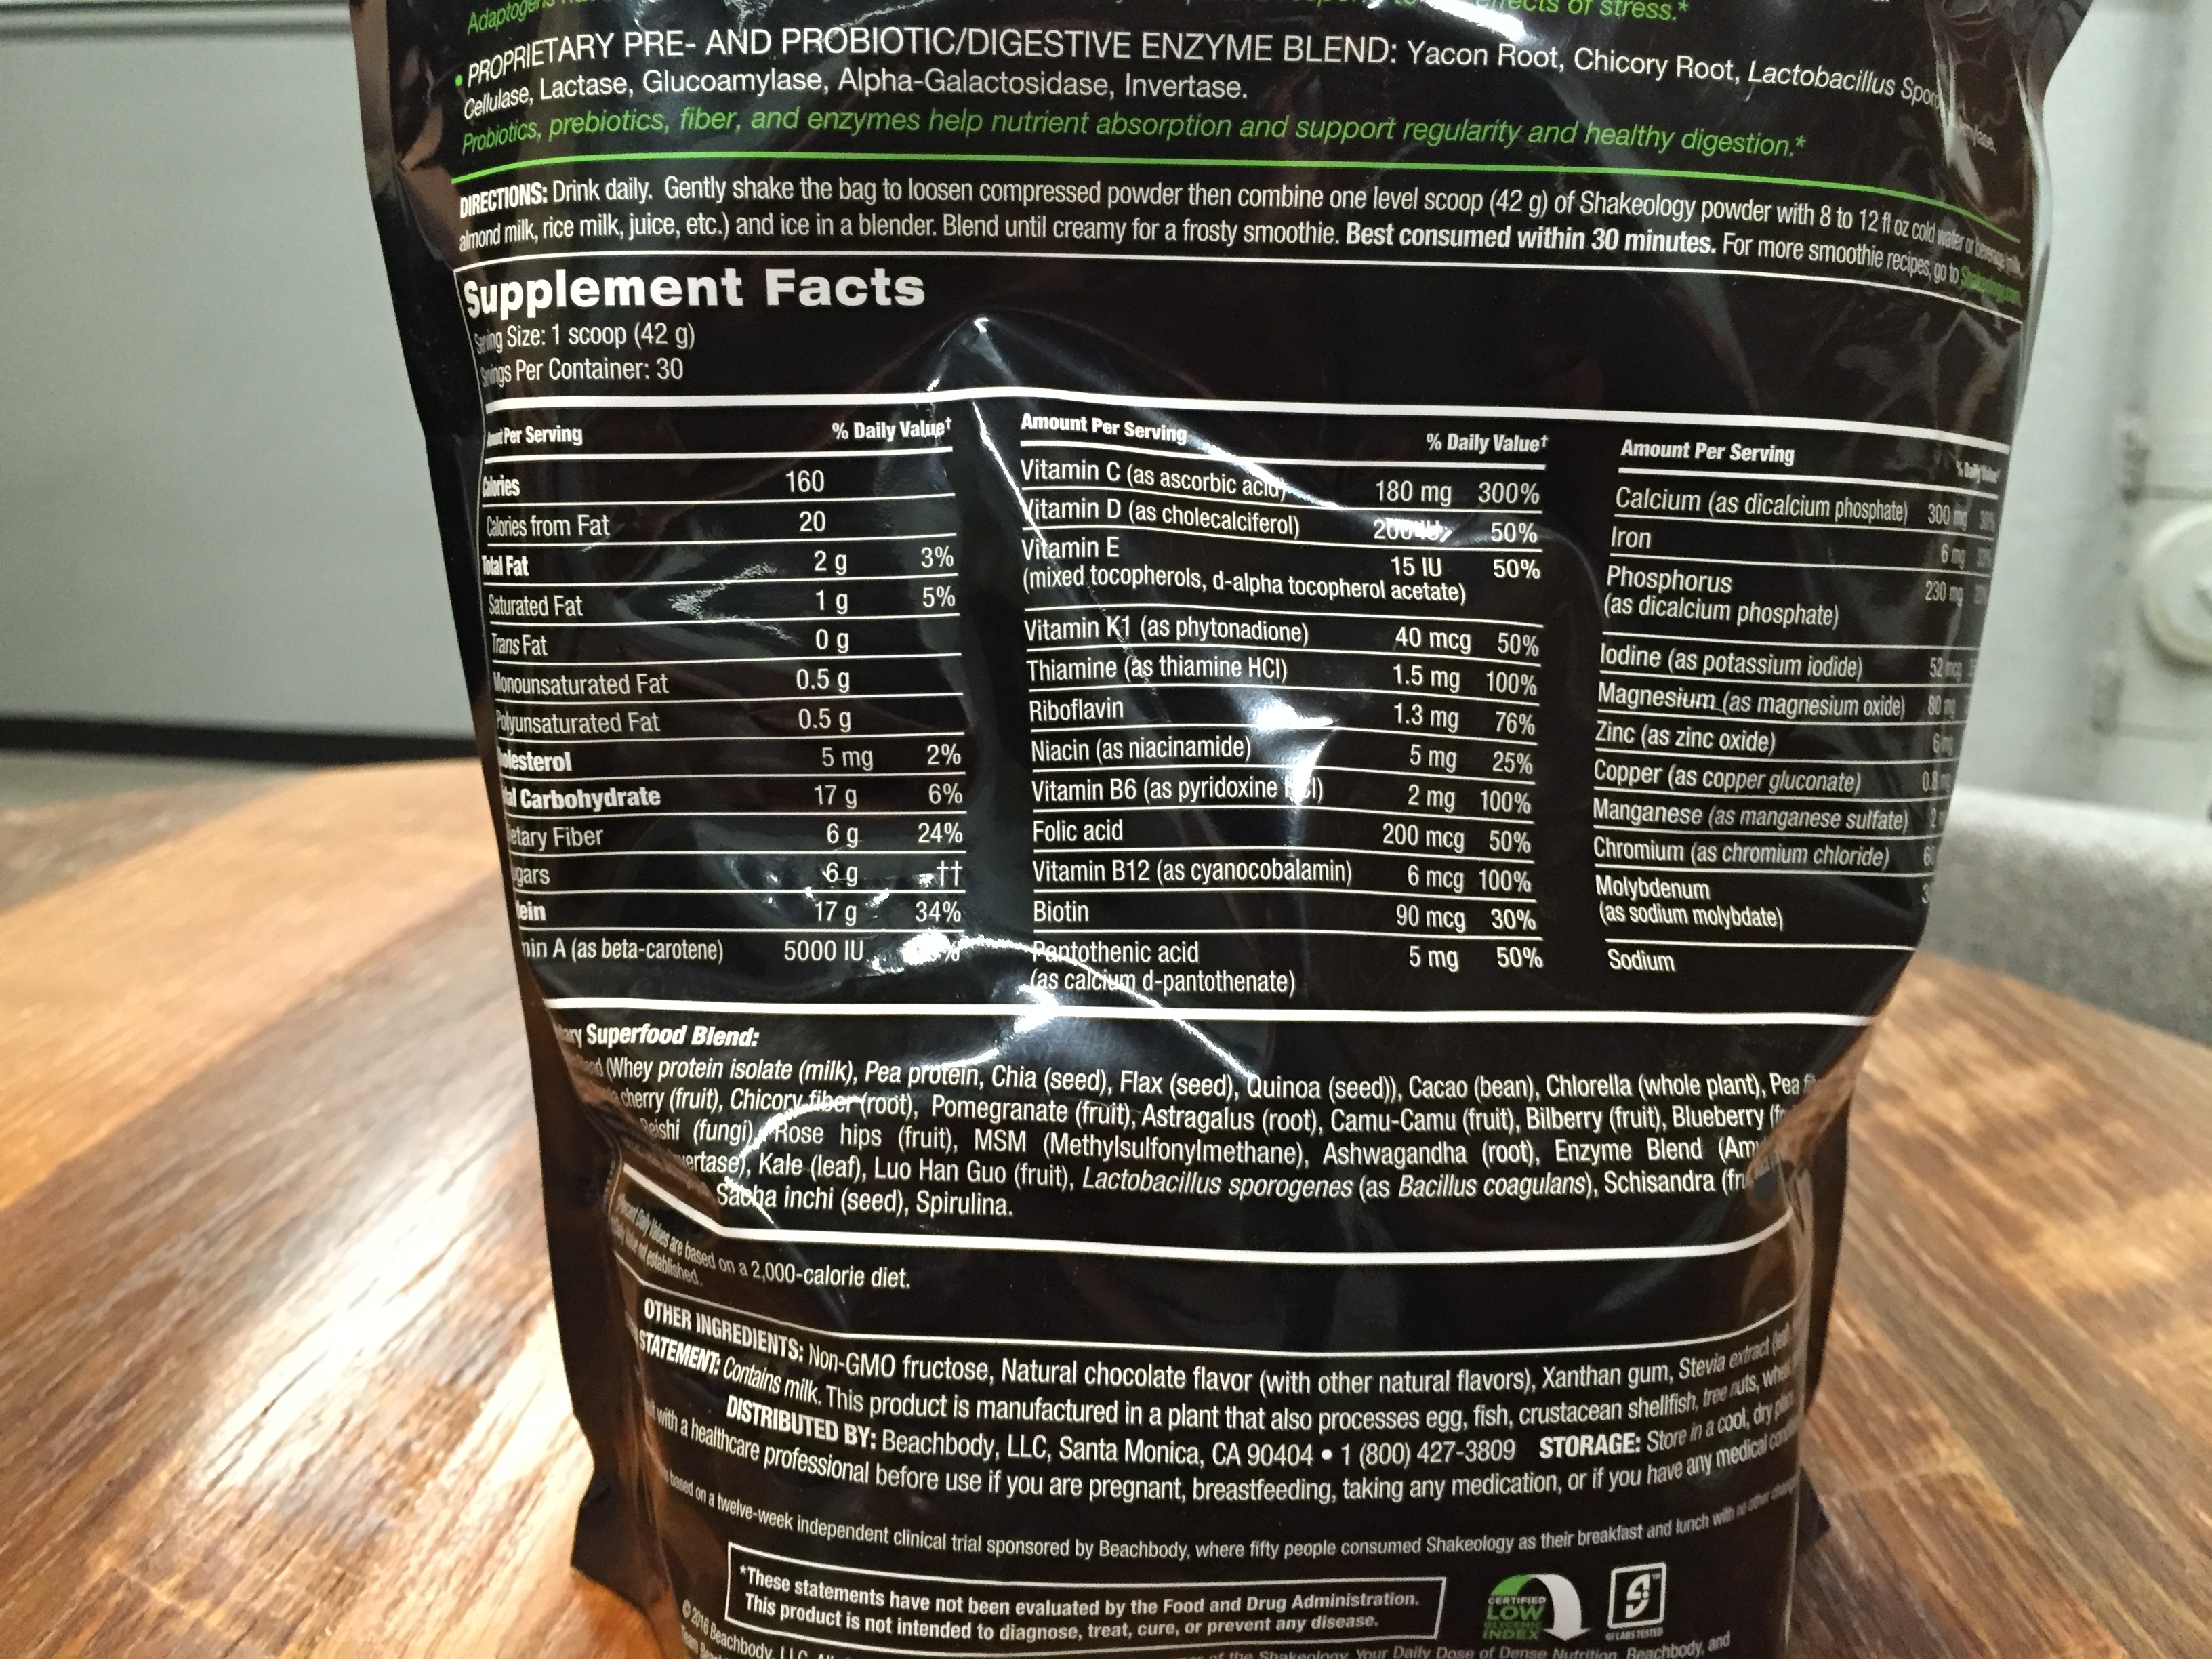 4 Easy Facts About Shakeology. Does It Work For Weight Loss? - Doug Cook Rd Described